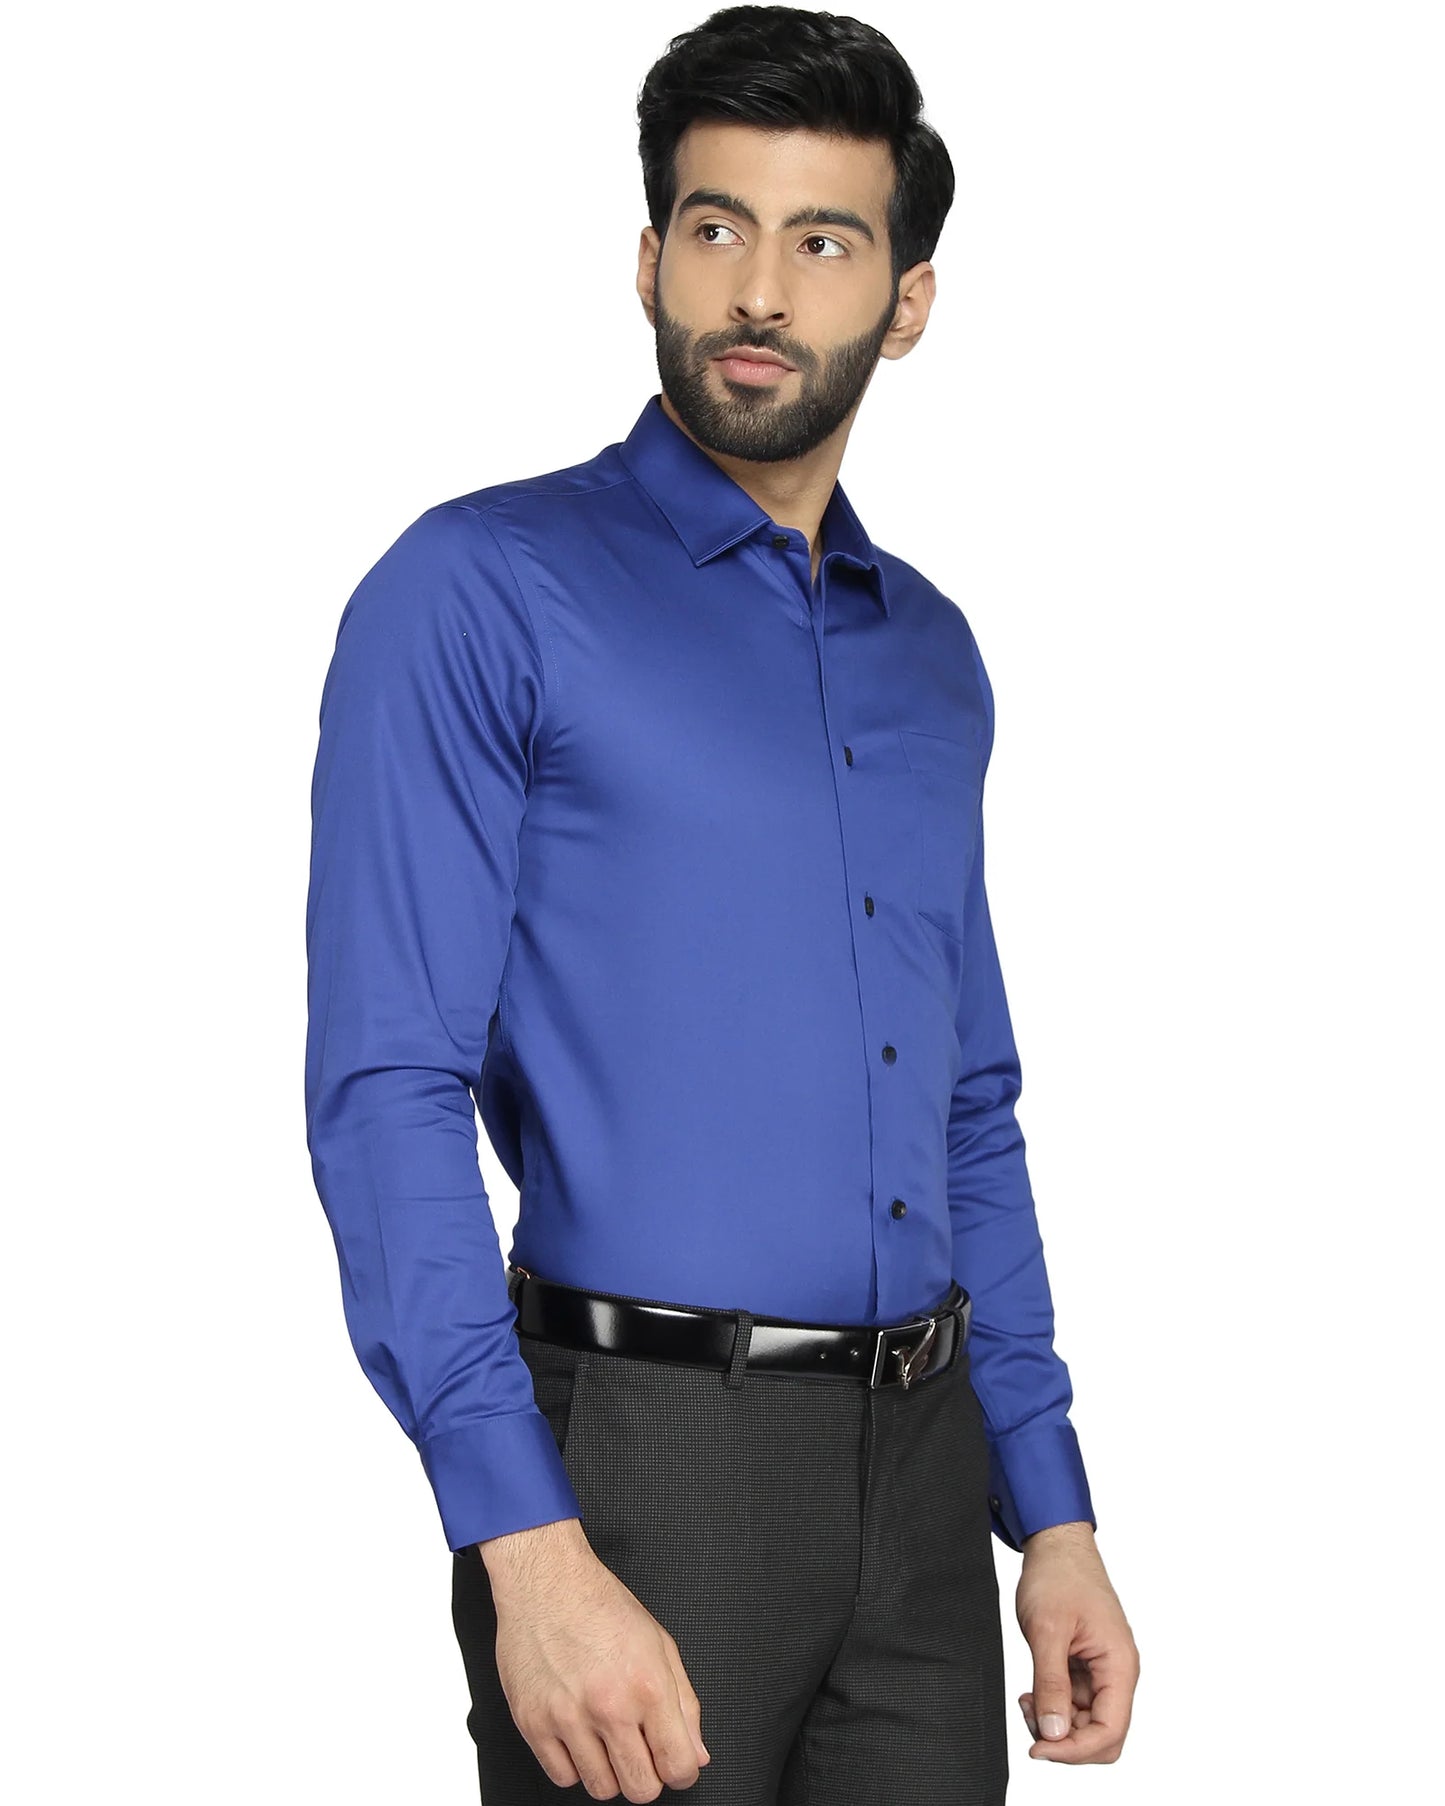 Solid formal shirt in royal blue